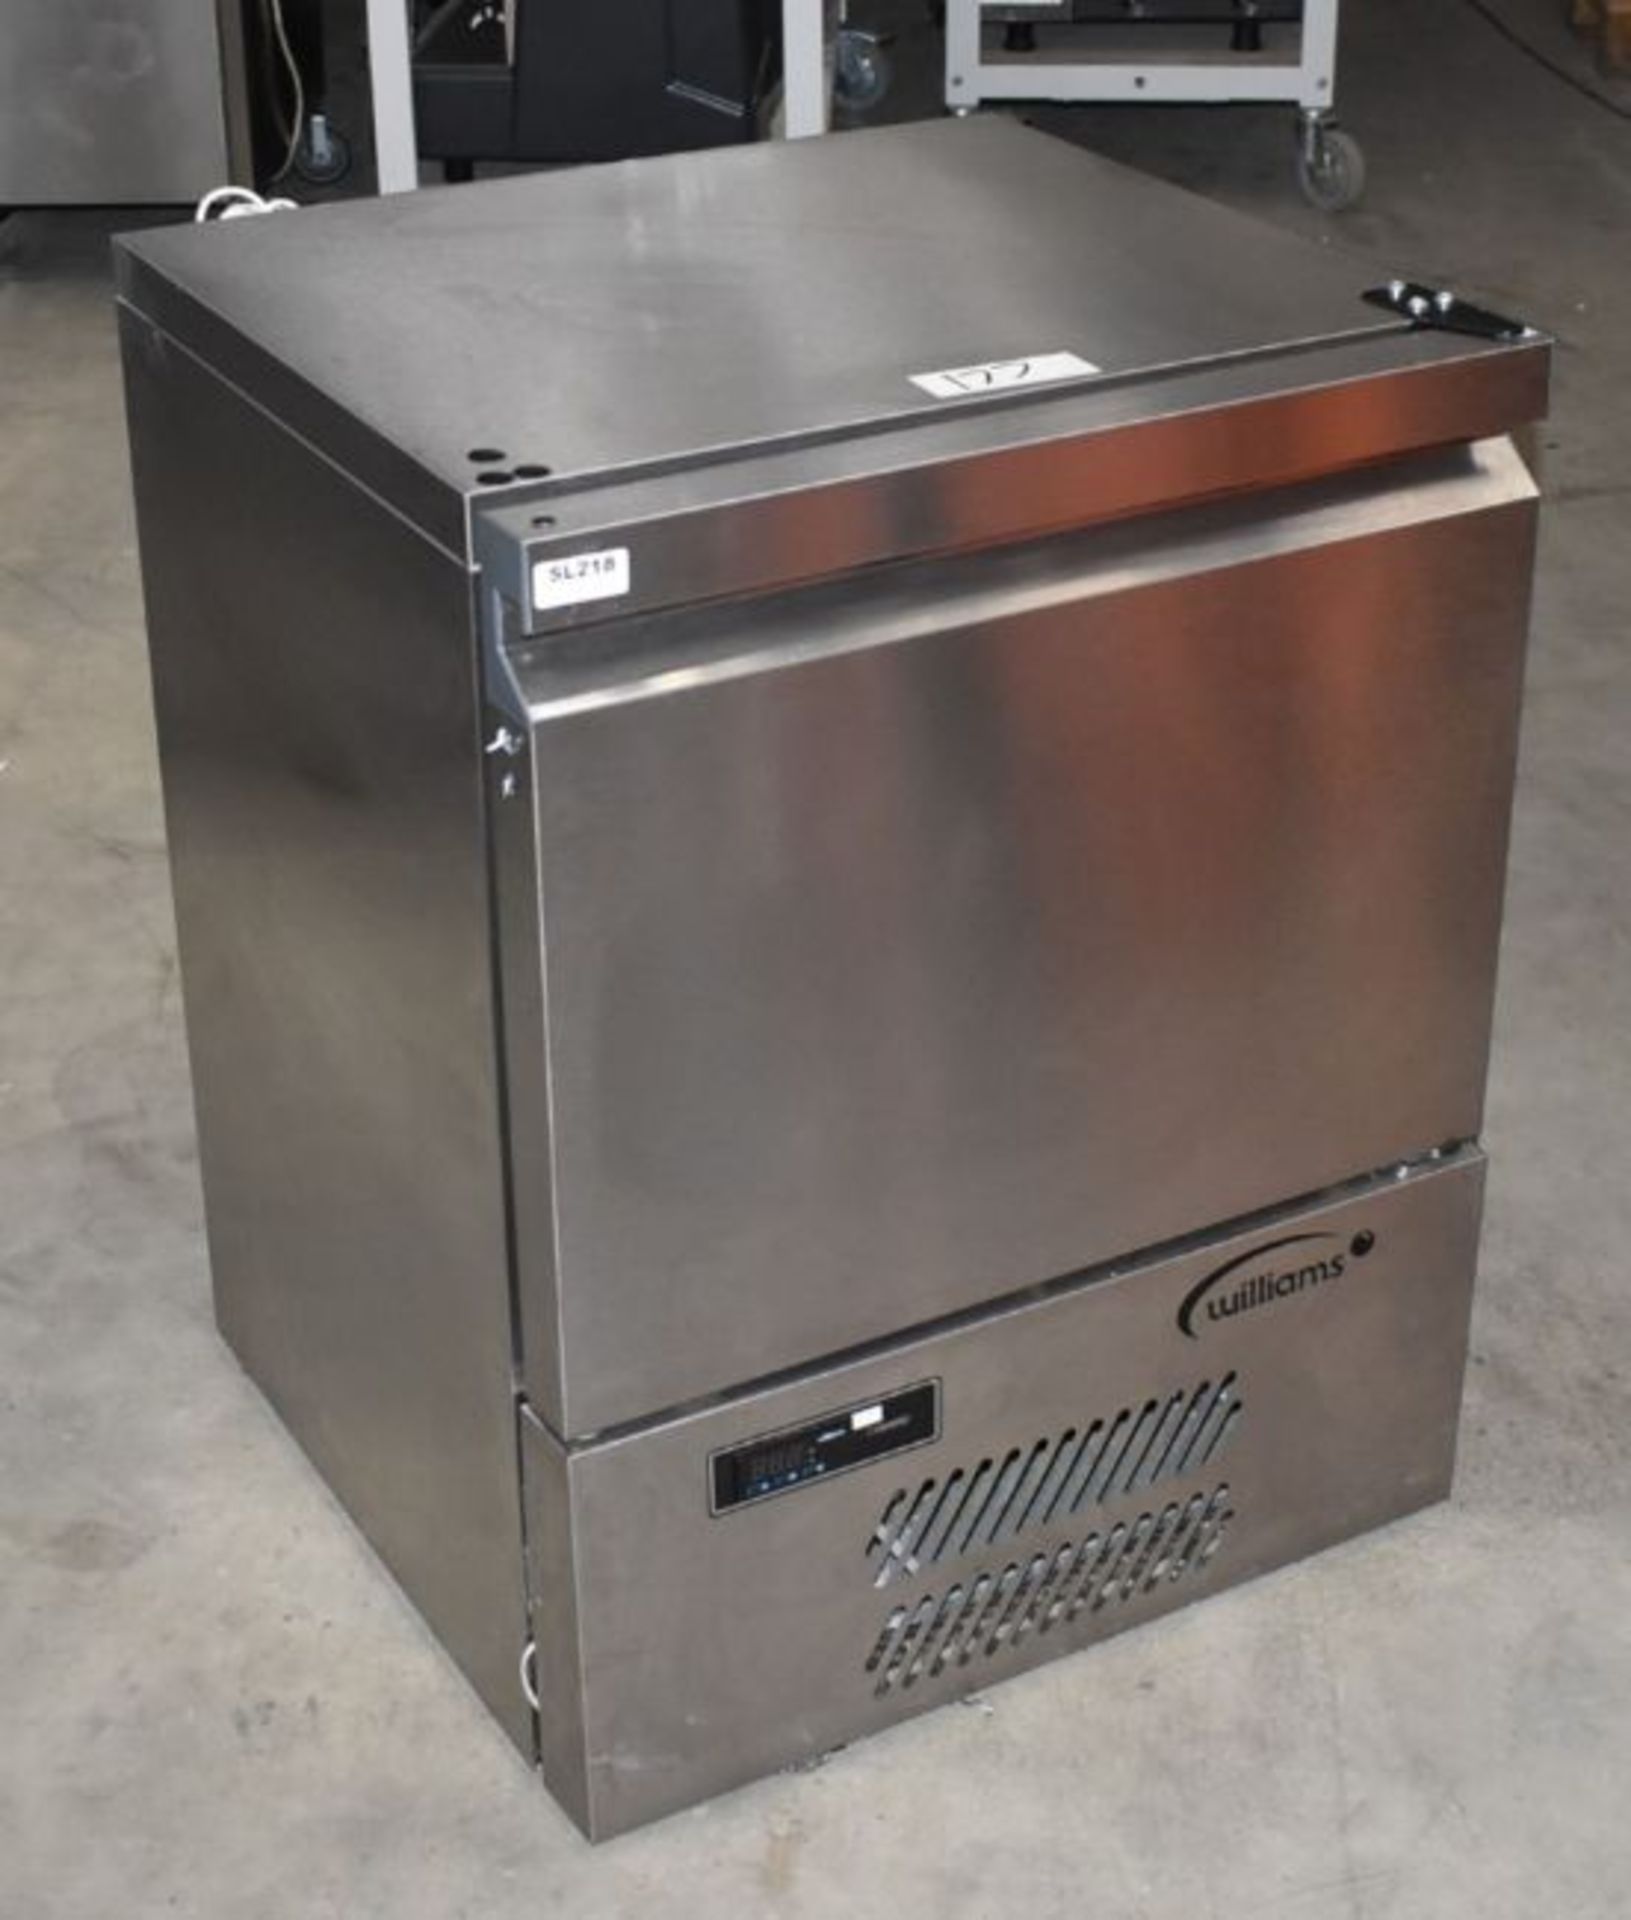 1 x Williams H5UC R290 R1 Single Door Stainless Steel Undercounter Fridge With Easy Grab Handle - Image 2 of 4